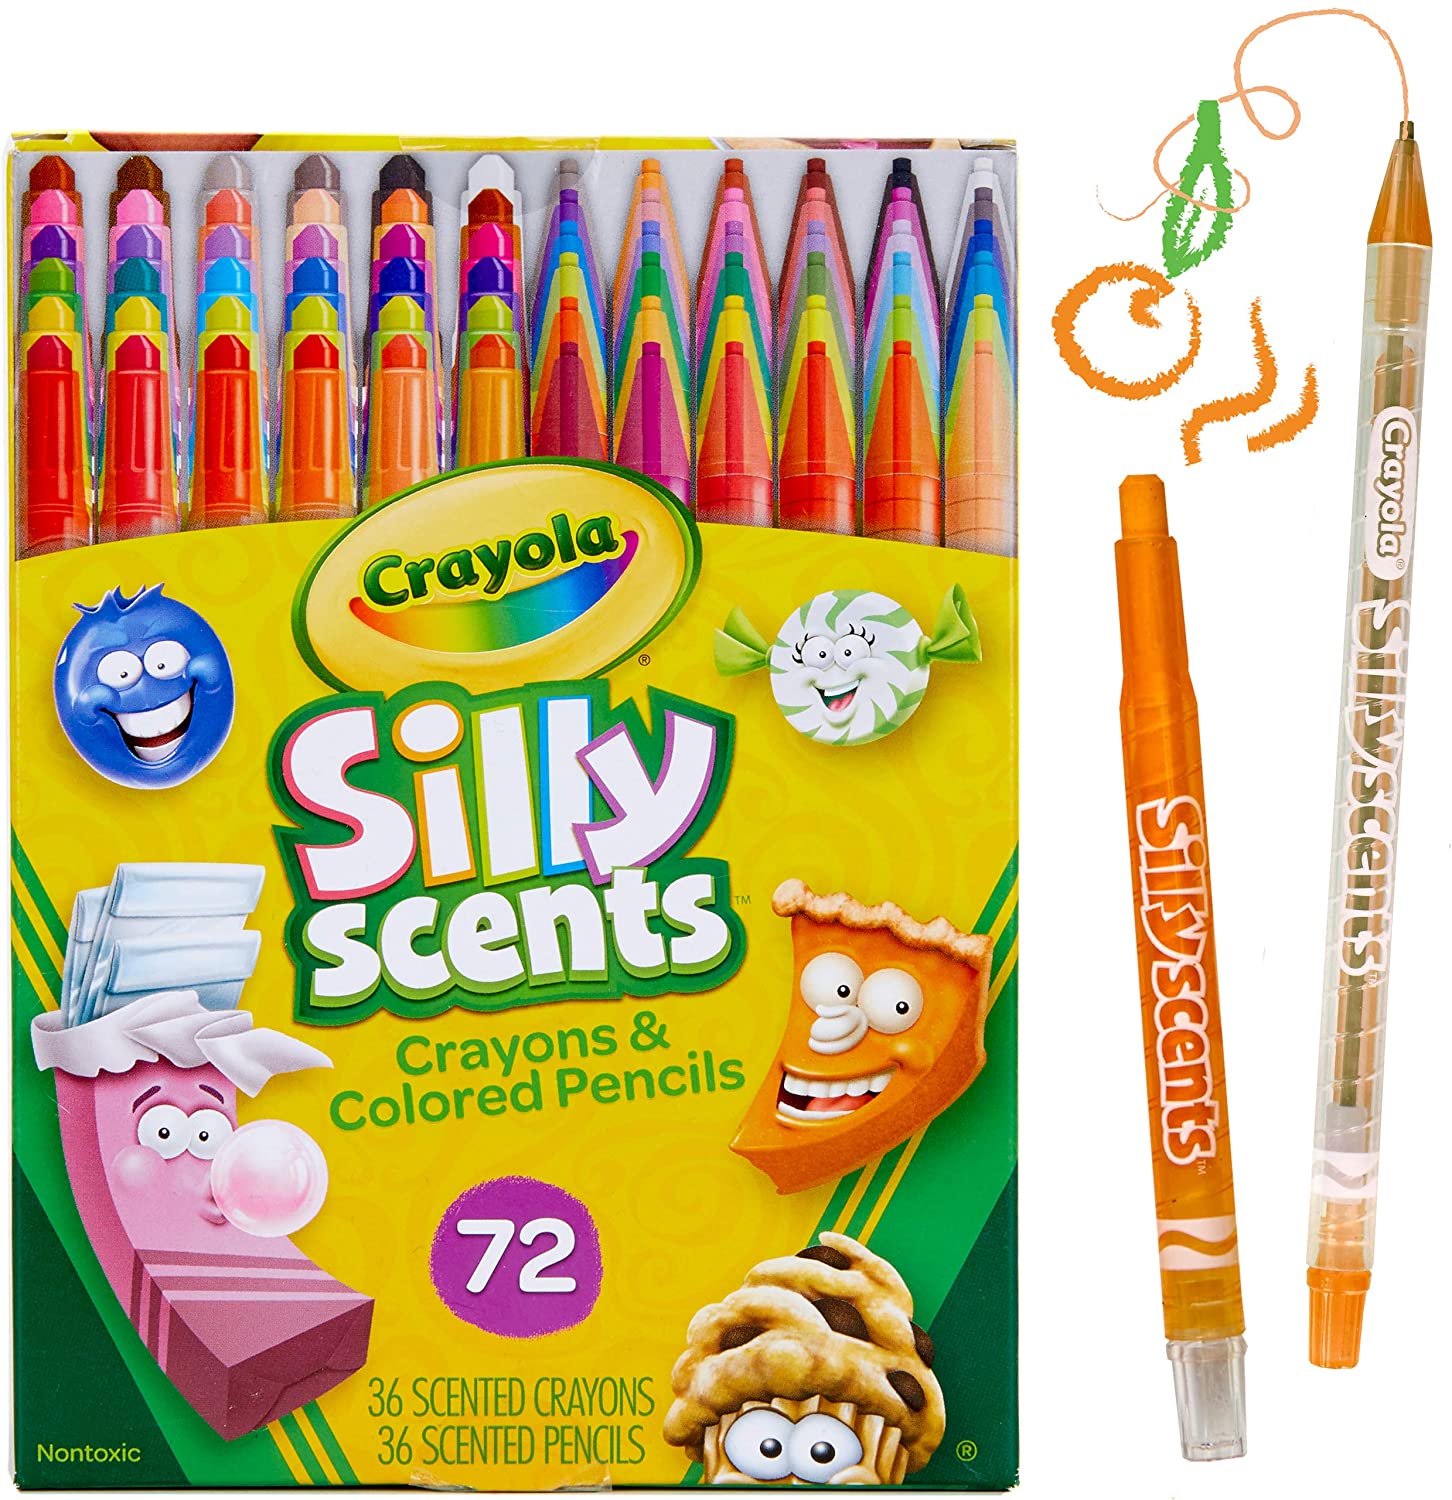 Silly Scents, Crayola Wiki